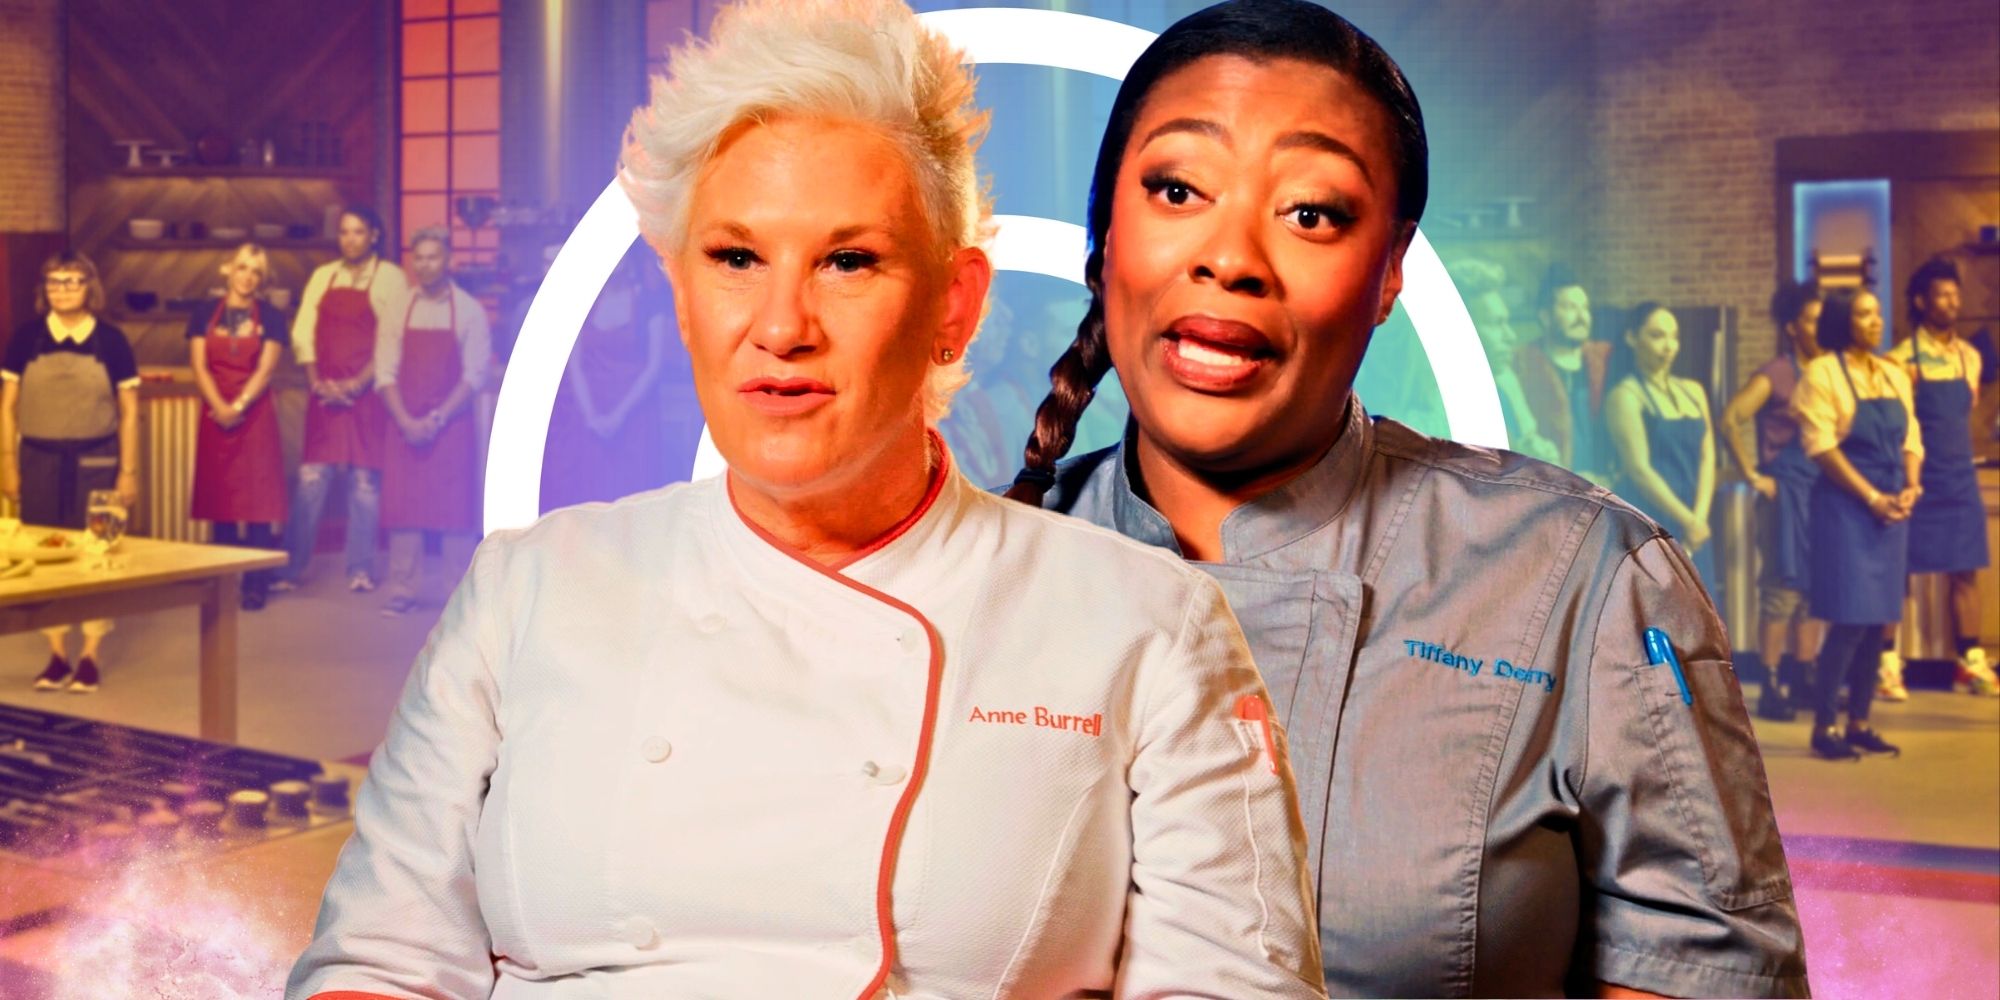 Worst Cooks in America Season 27 Hosts Anne Burrell and Tiffany Derry With Cast Montage in Background